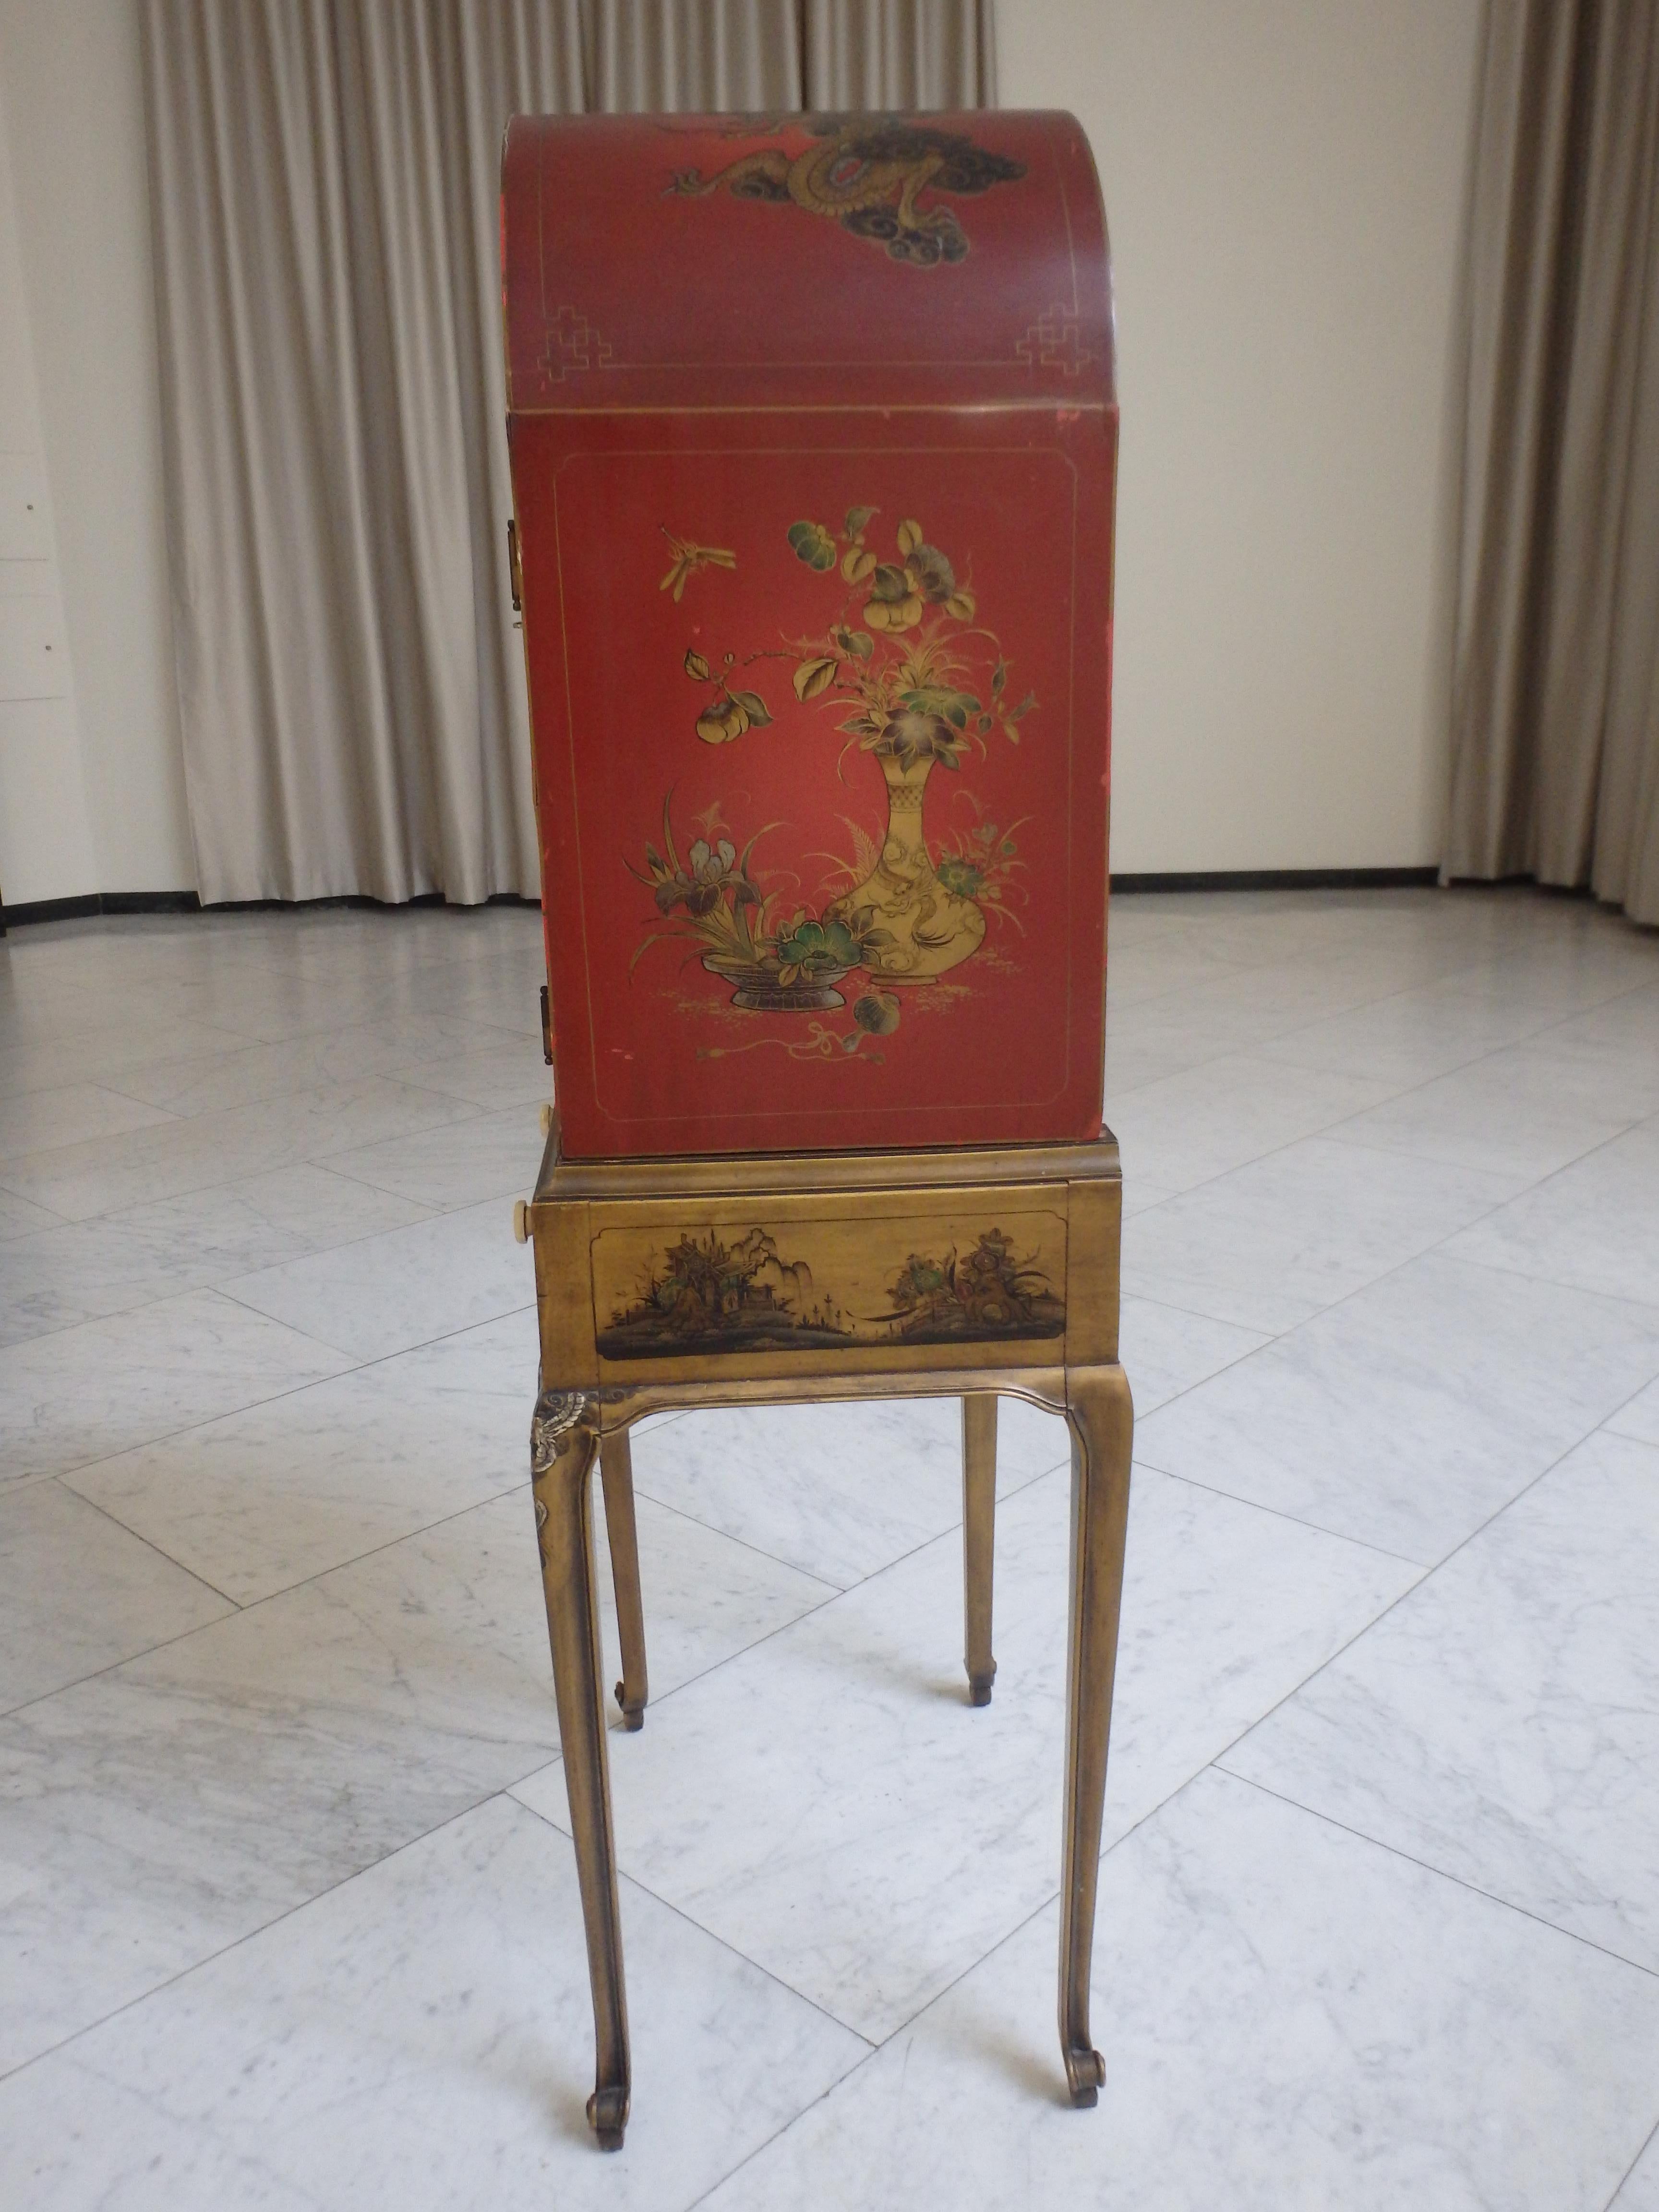 1920 elegant Japonisem red and gold dry bar with sculpted figures and pagodes im Angebot 7